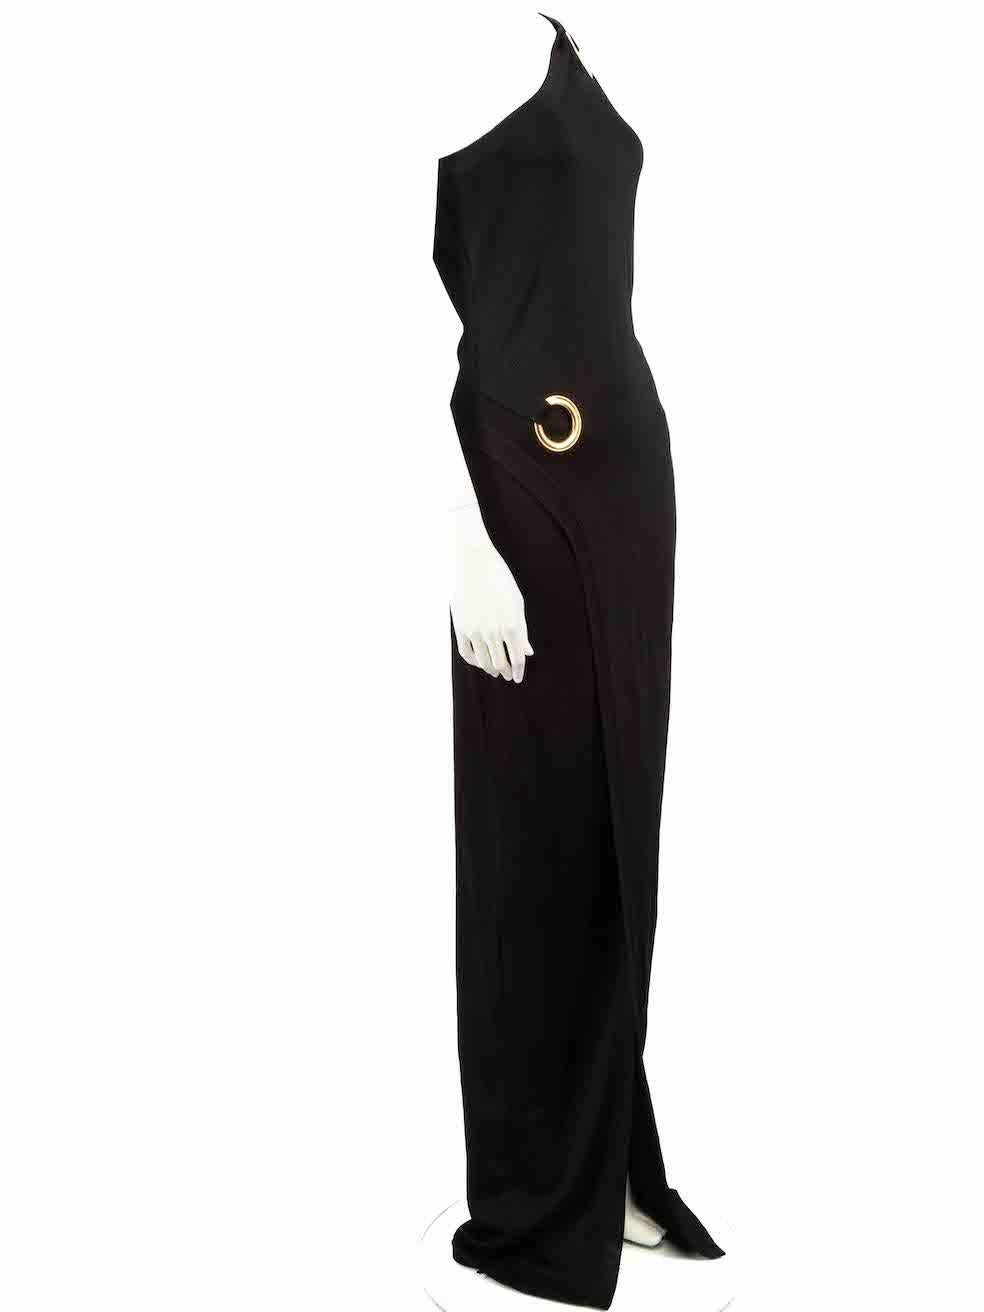 CONDITION is Very good. Minimal wear to dress is evident. Minimal pull thread to rear right hem on this used Balmain designer resale item.
 
 
 
 Details
 
 
 Black
 
 Viscose
 
 Dress
 
 One shoulder
 
 Sleeveless
 
 Maxi
 
 Gold ring buckle
 
